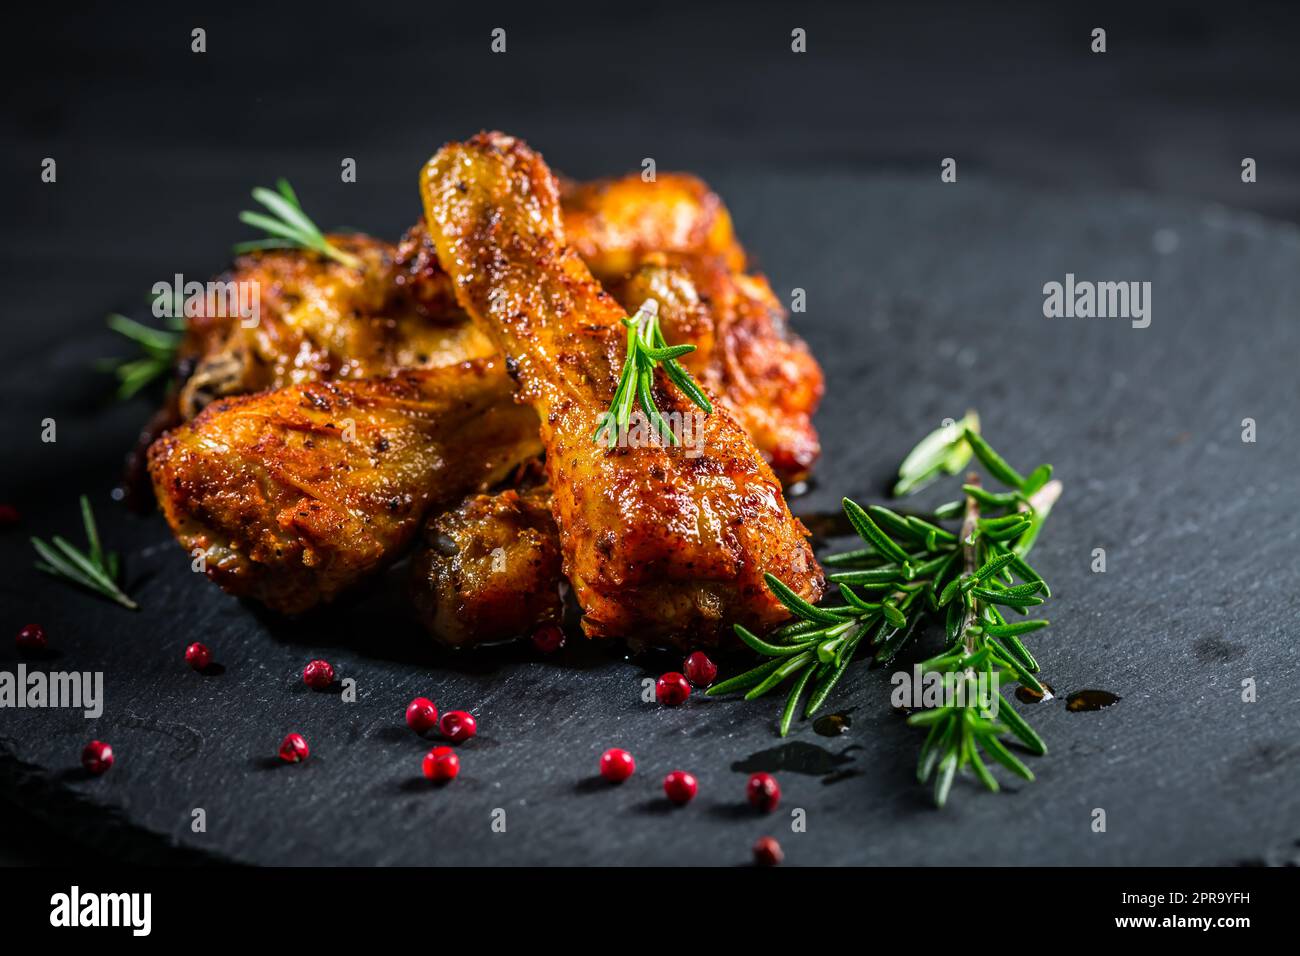 Oven baked chicken drumsticks Stock Photo